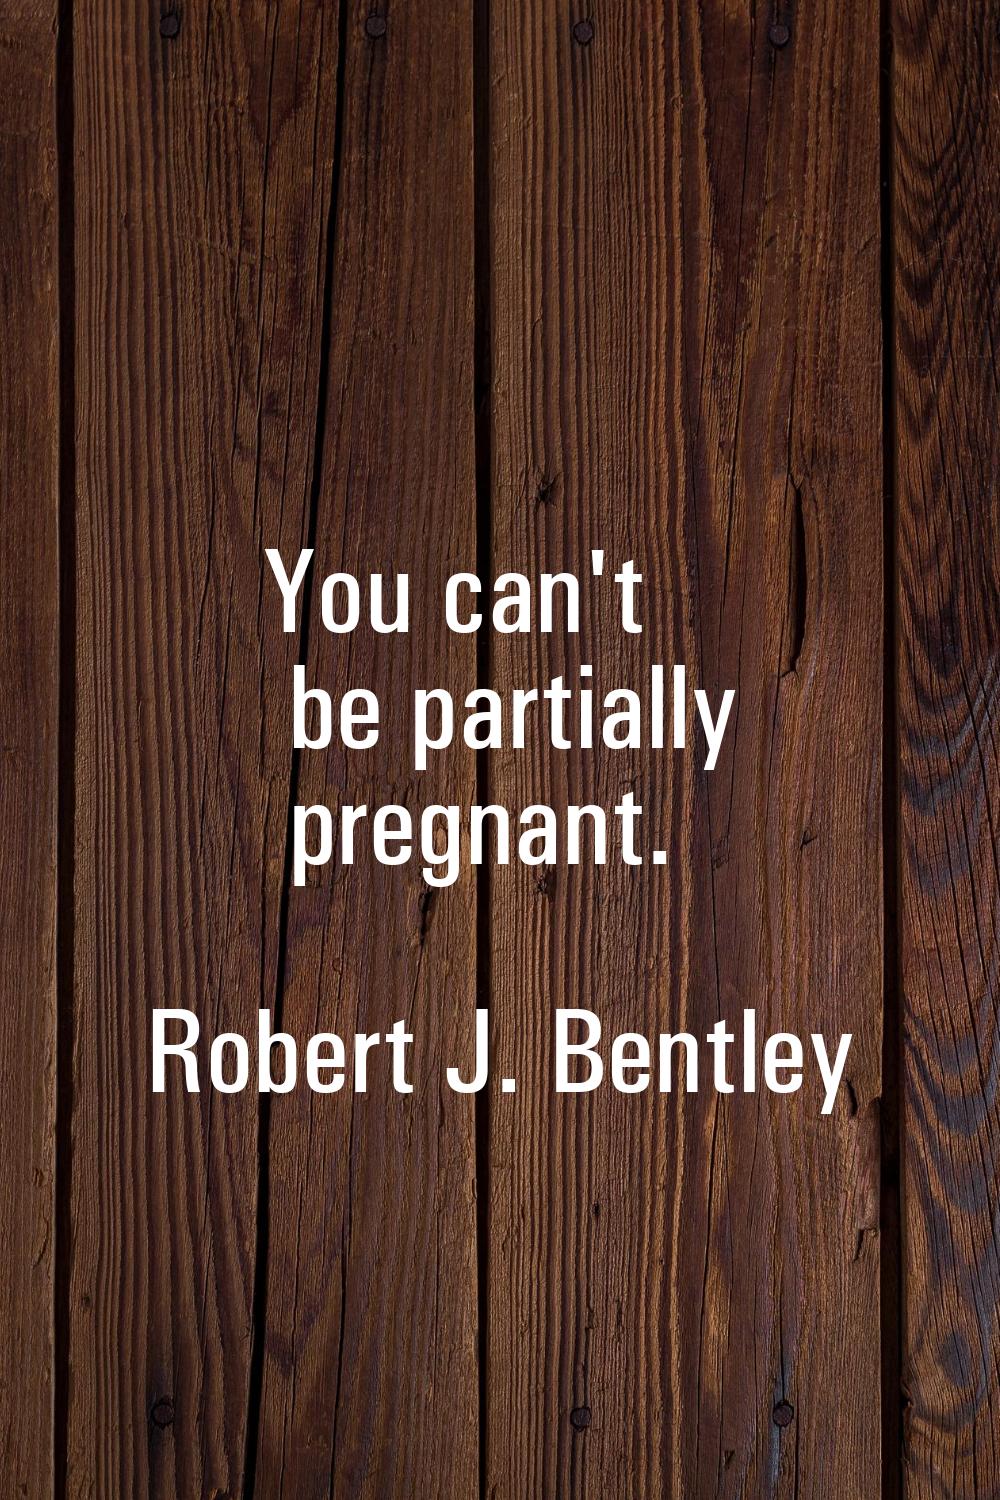 You can't be partially pregnant.